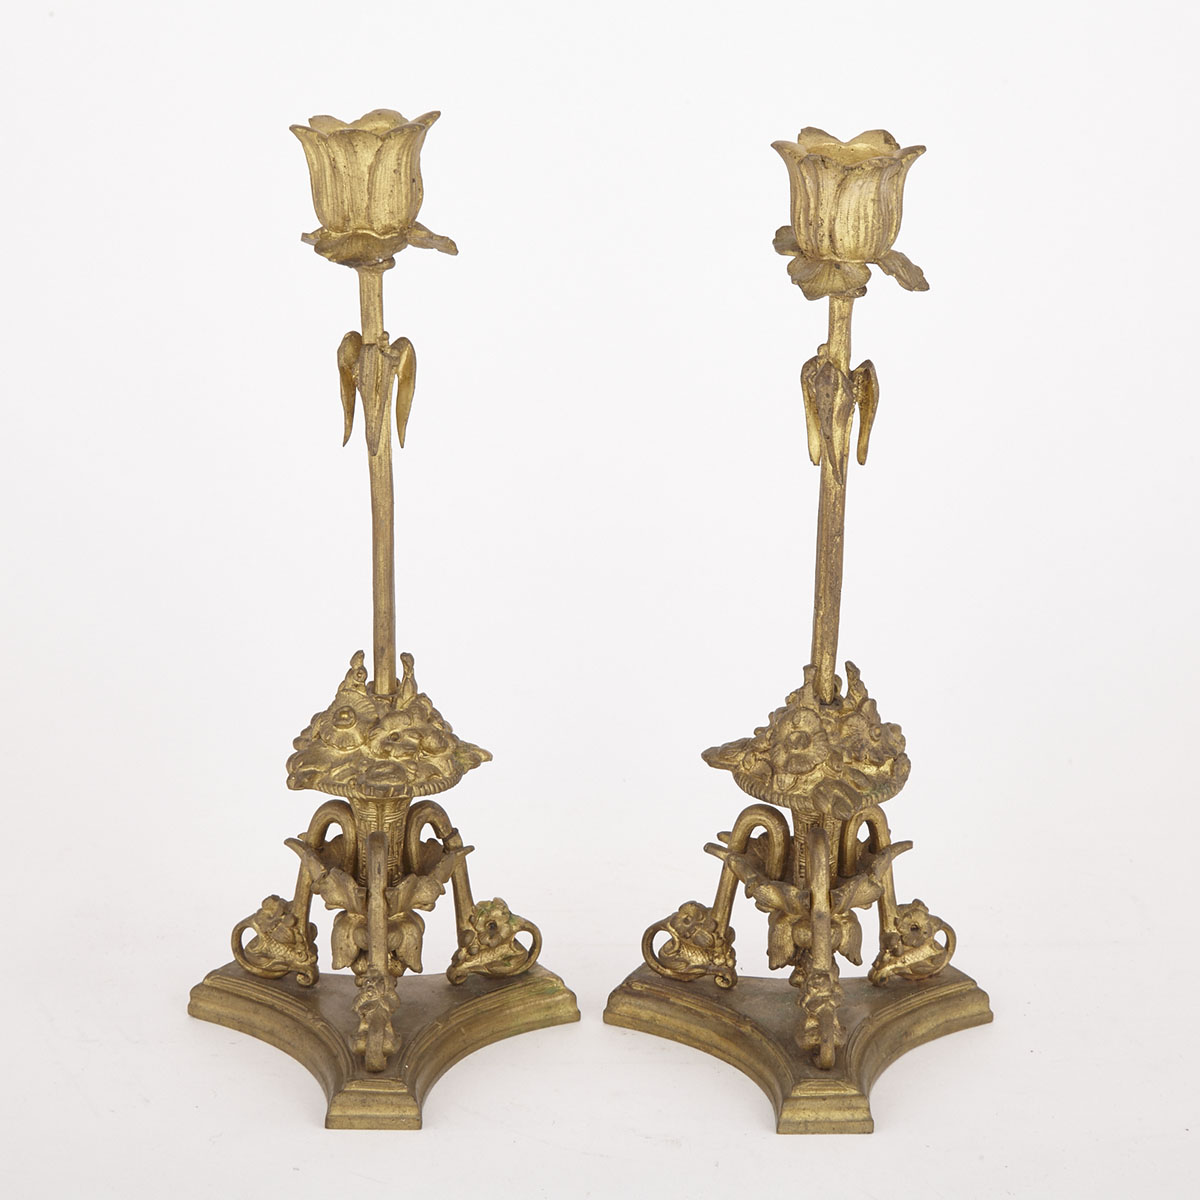 Pair of French Aesthetic Movement Gilt Bronze Candlesticks, c.1870